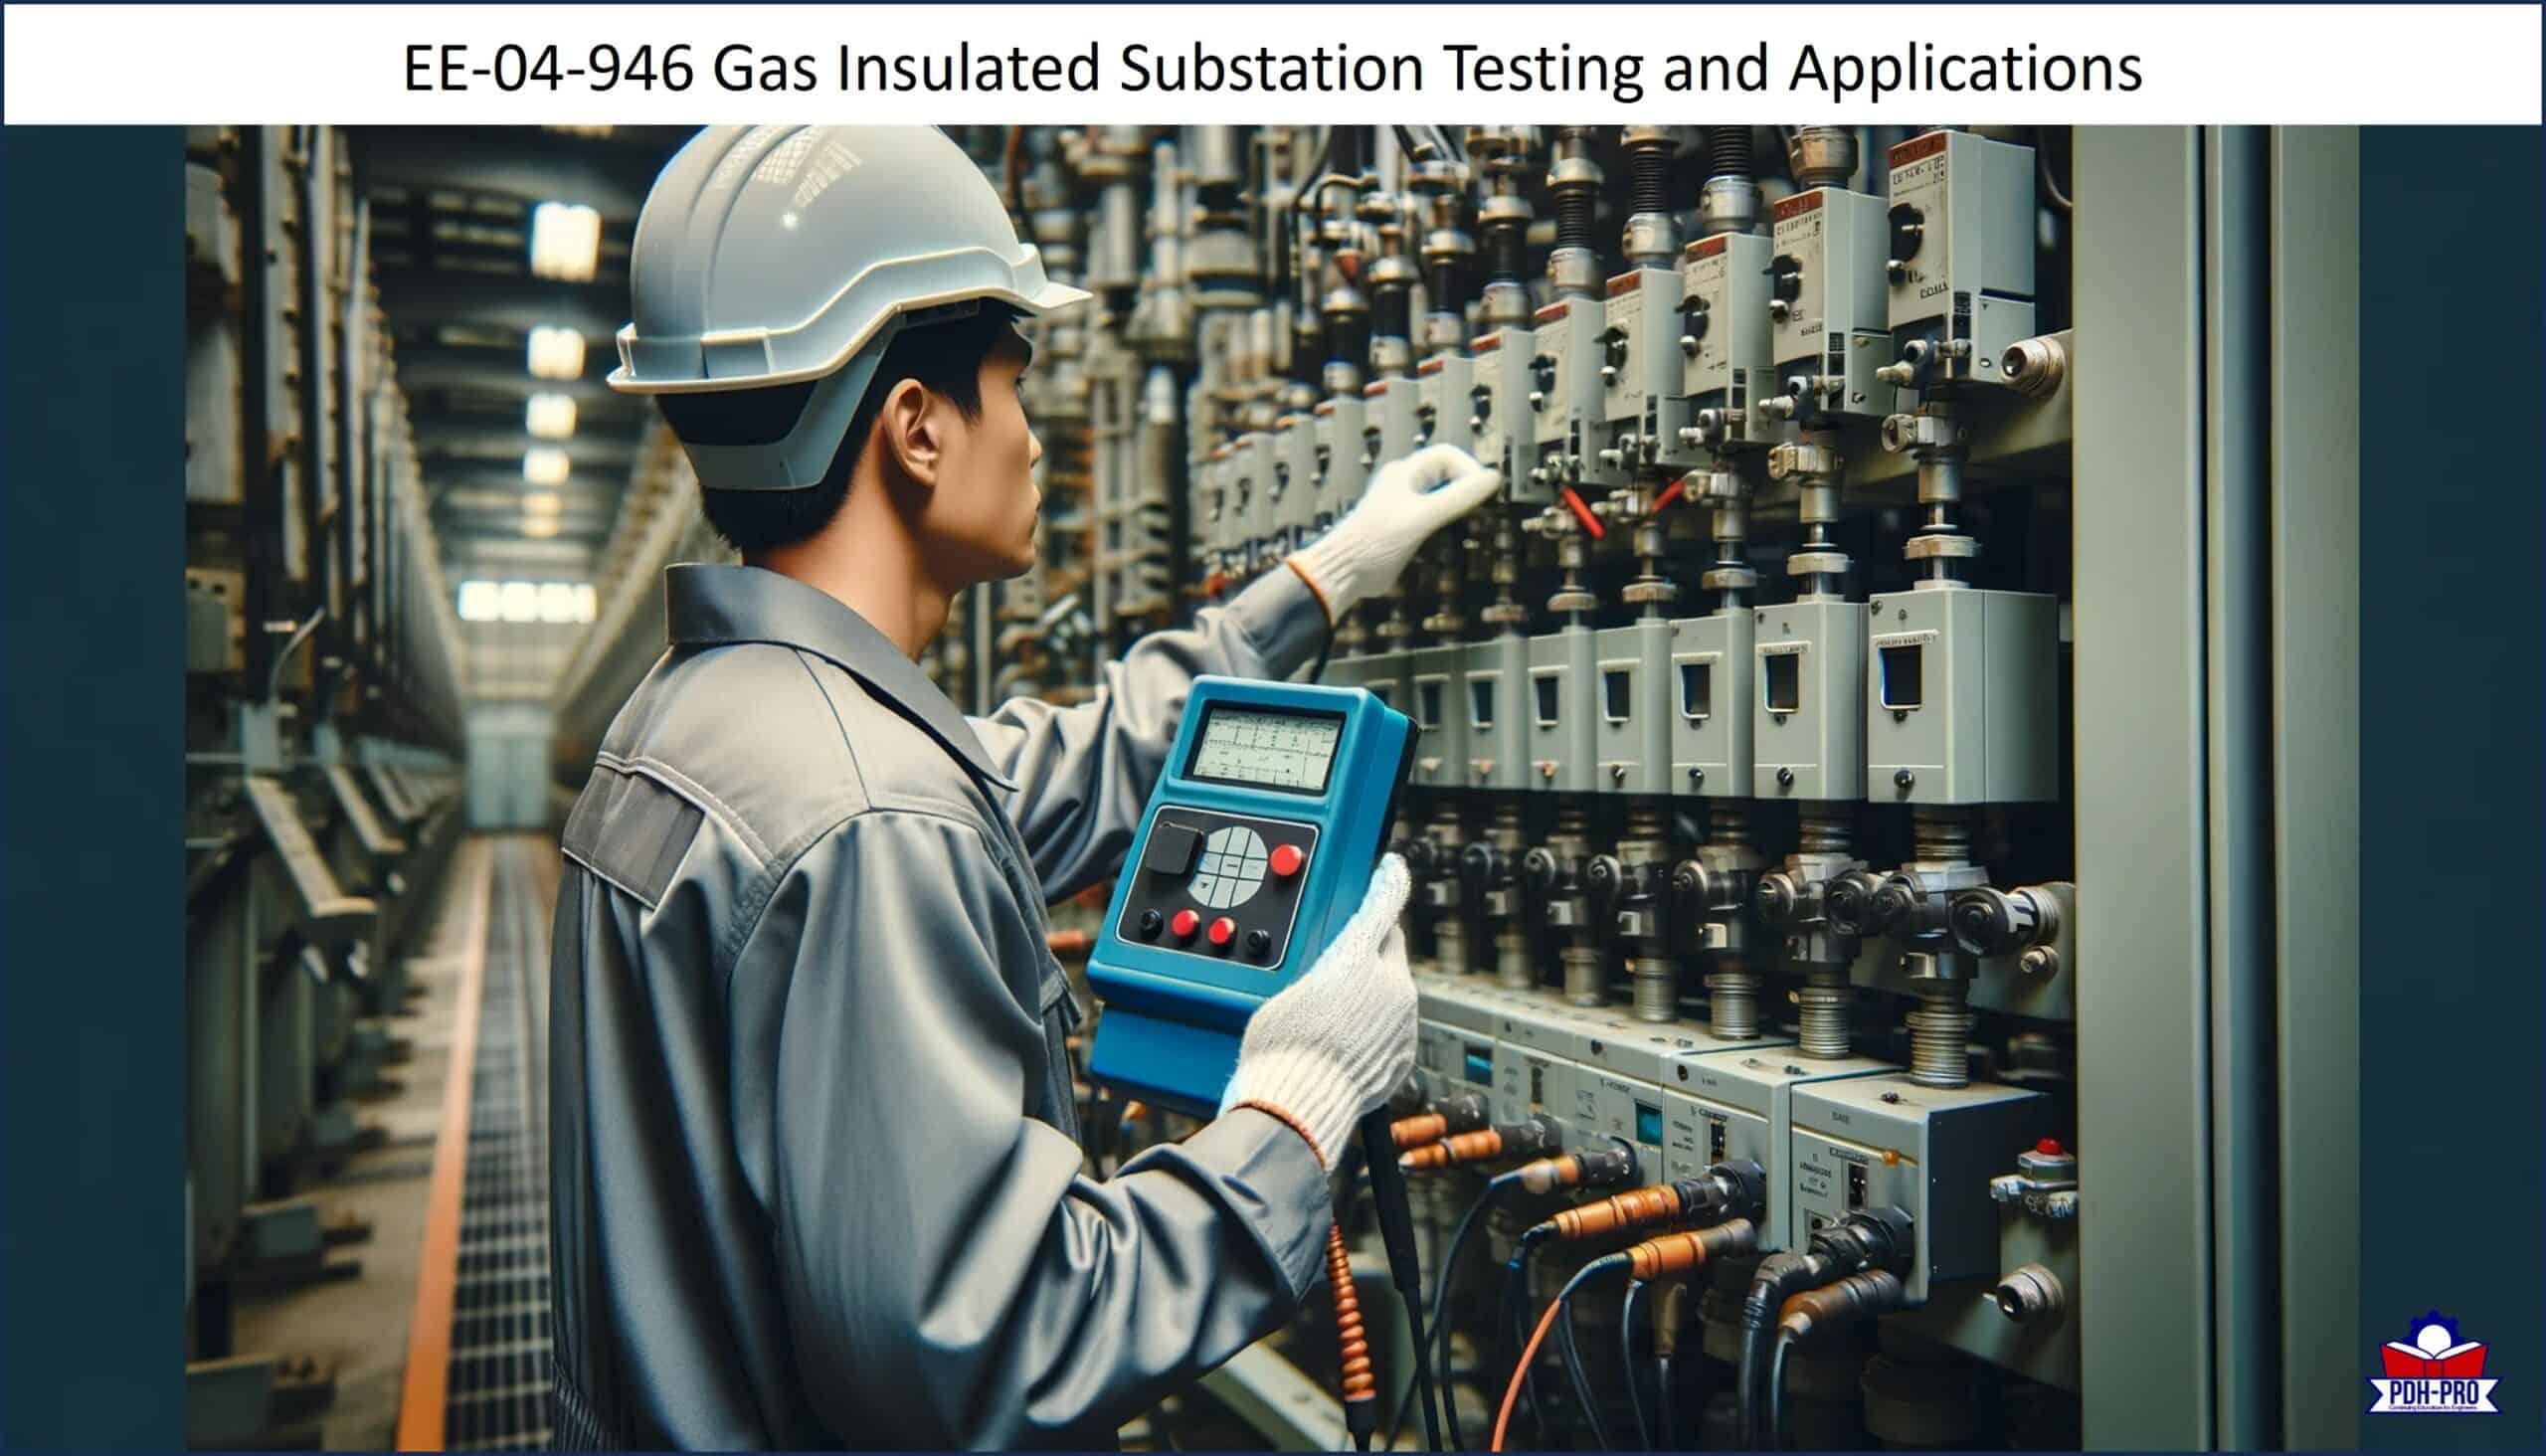 Gas Insulated Substation Testing and Applications